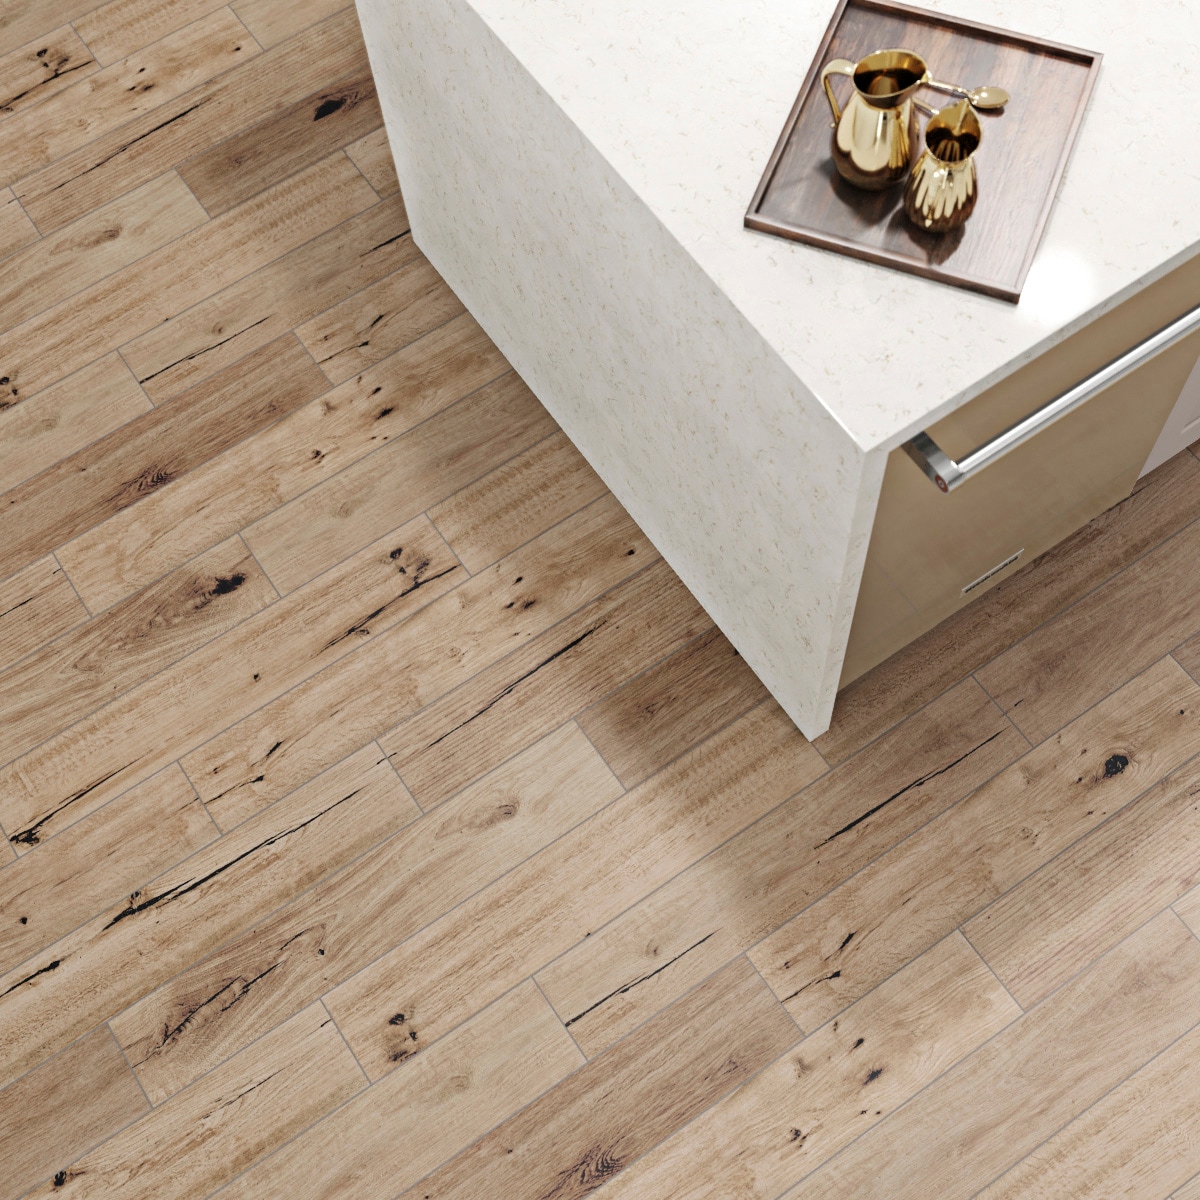 Wood-effect tiles: the beauty of natural wood without the upkeep